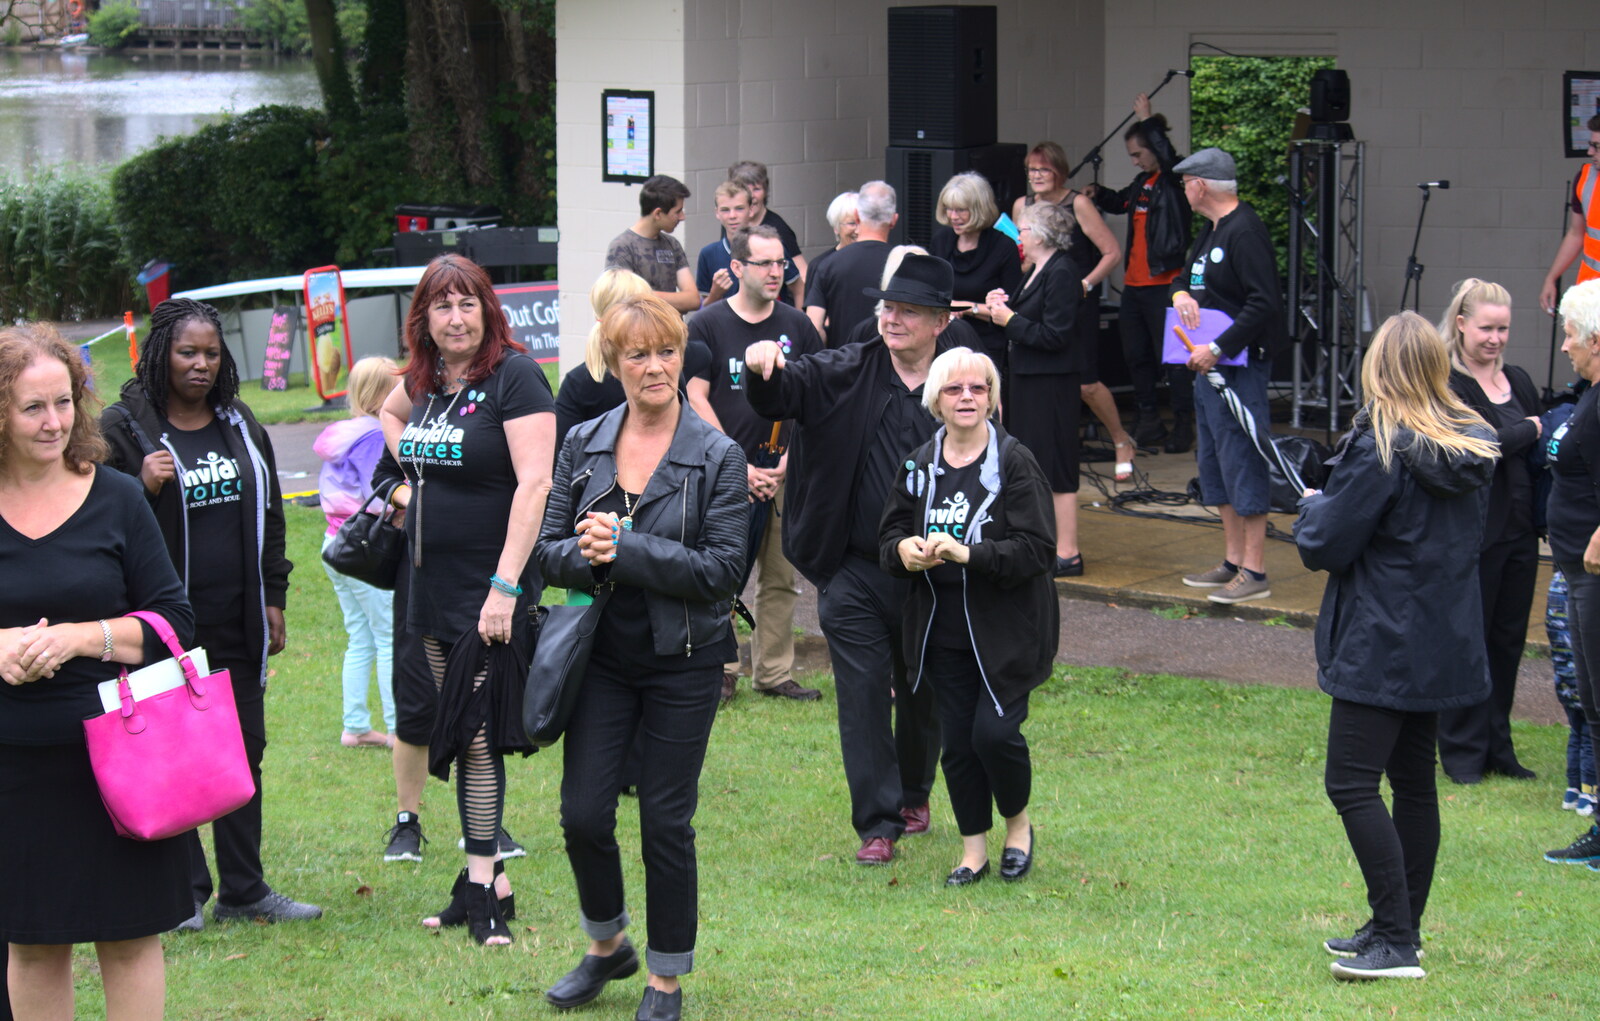 The choir leaves the pavillion from Diss Fest, or Singin' in the Rain, Diss, Norfolk - 23rd July 2017